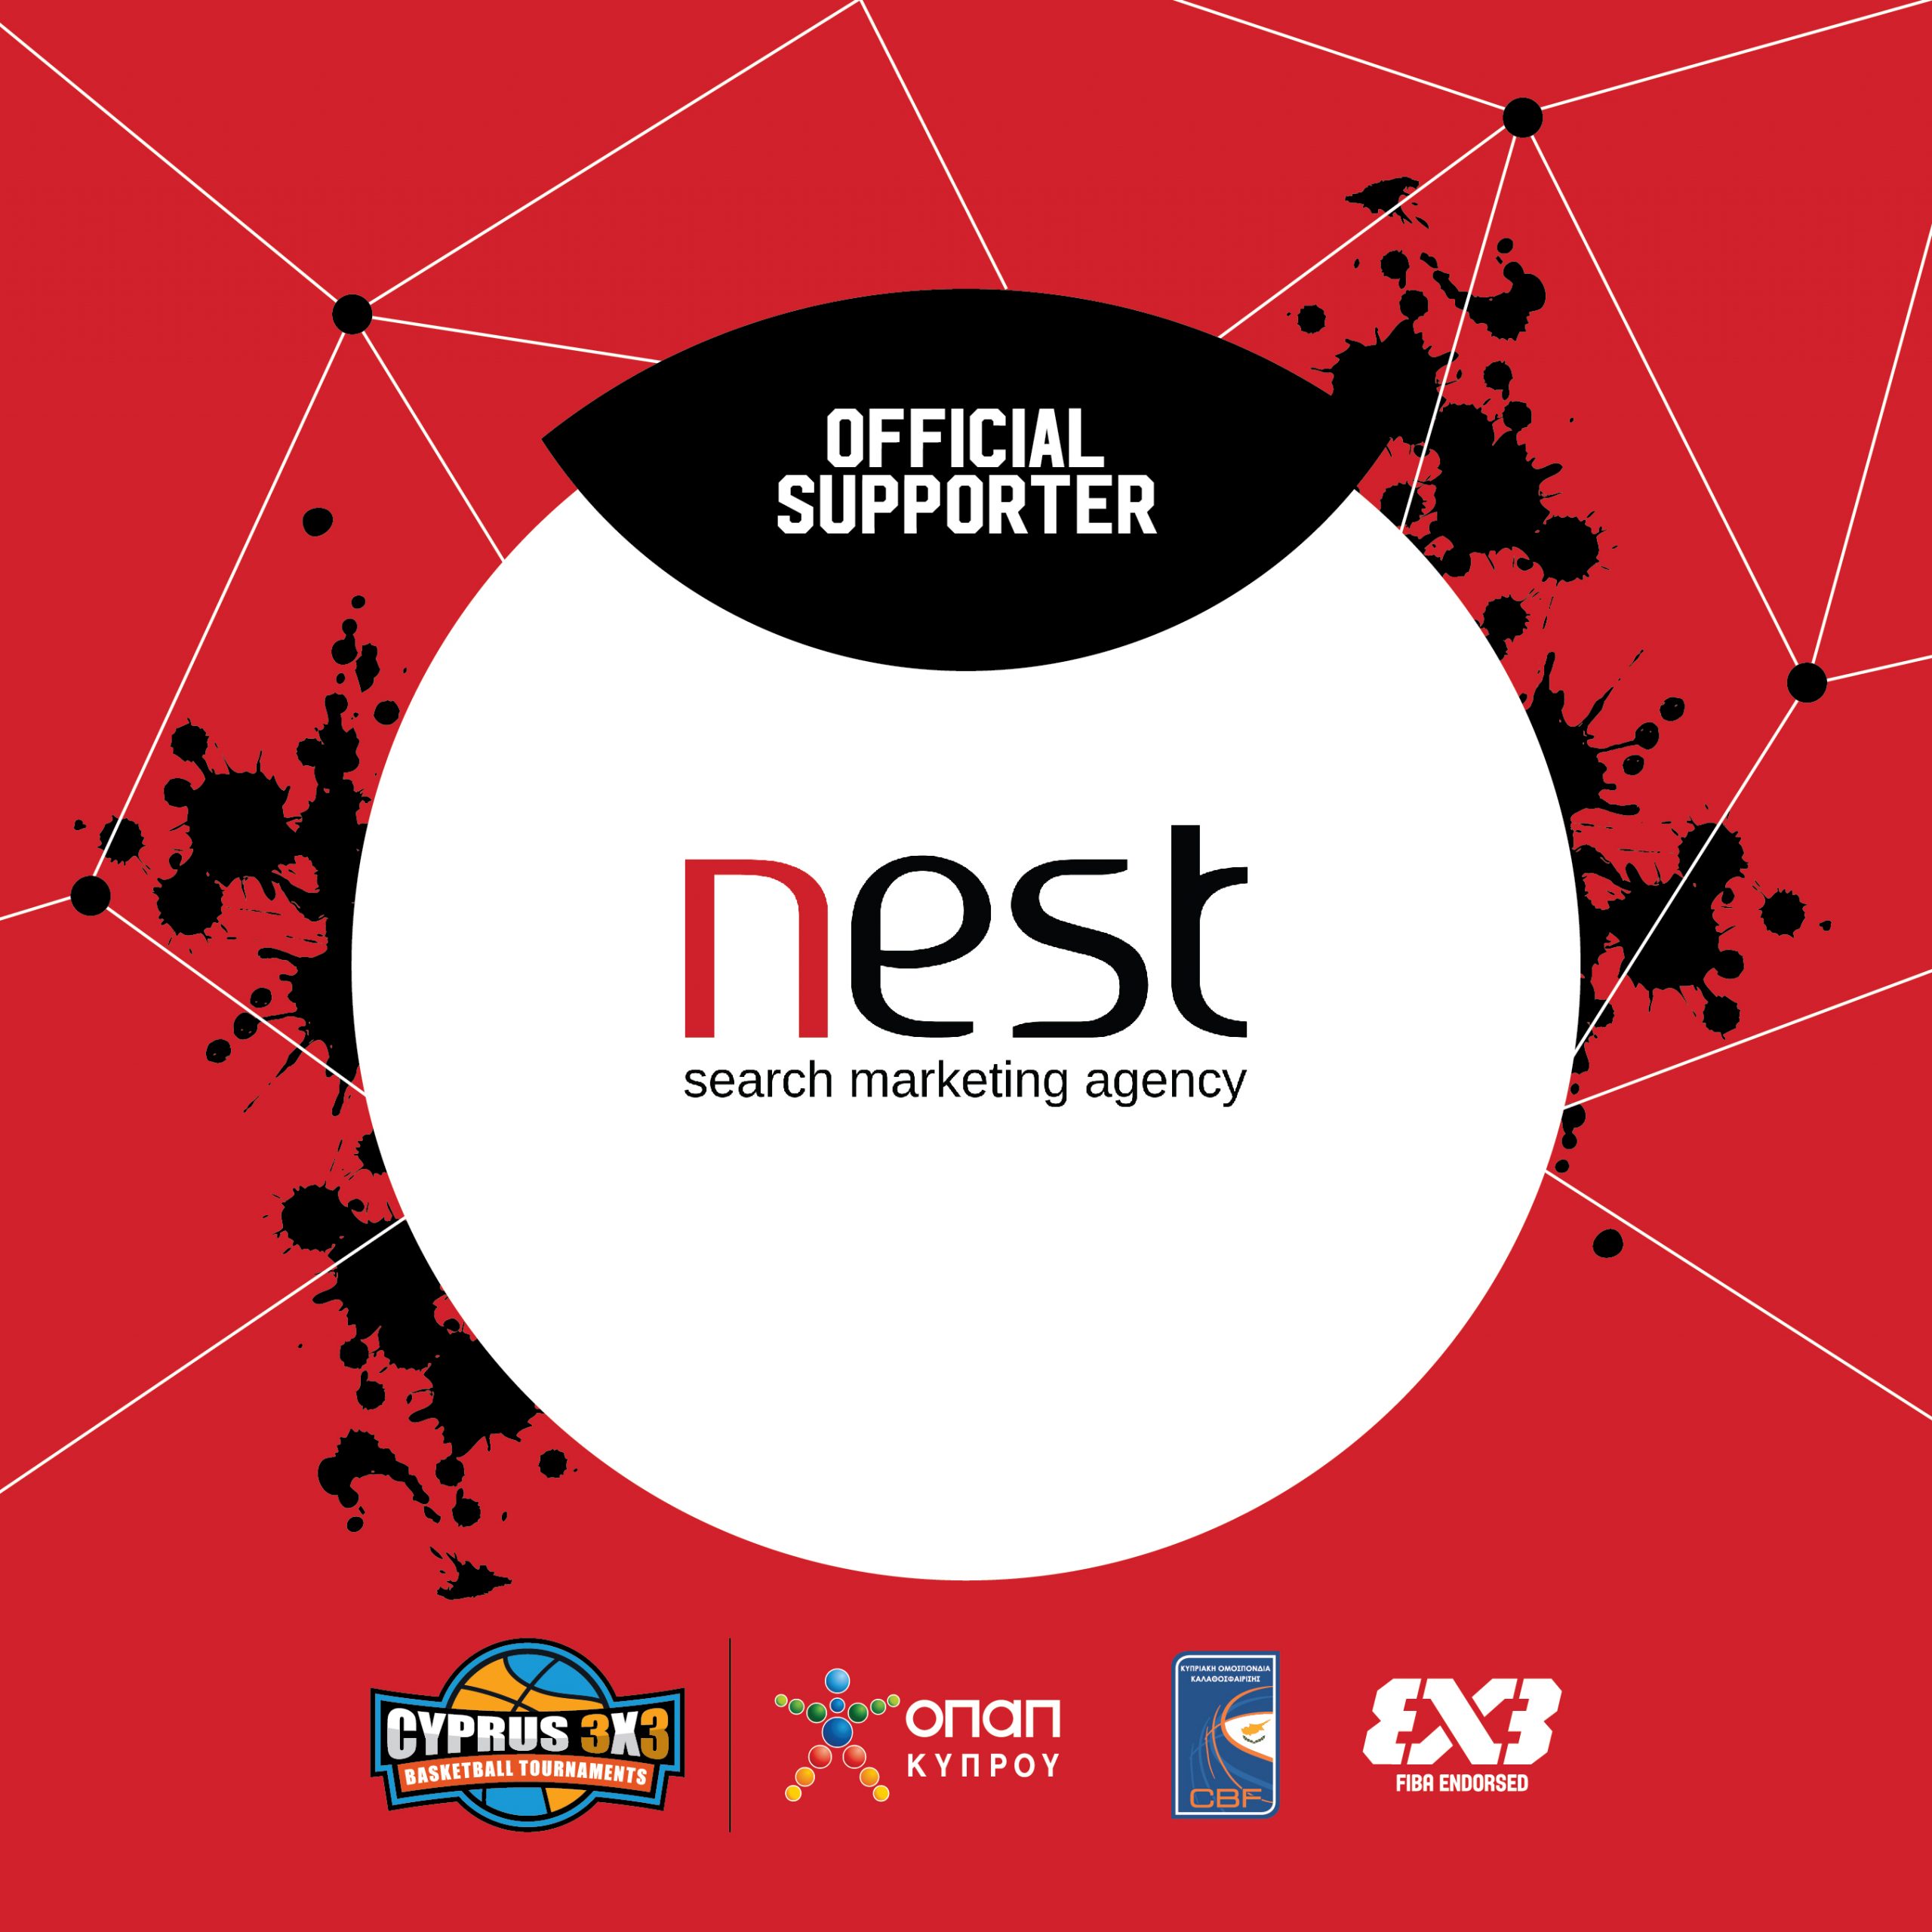 Nest is an official supporter of Cyprus 3×3.